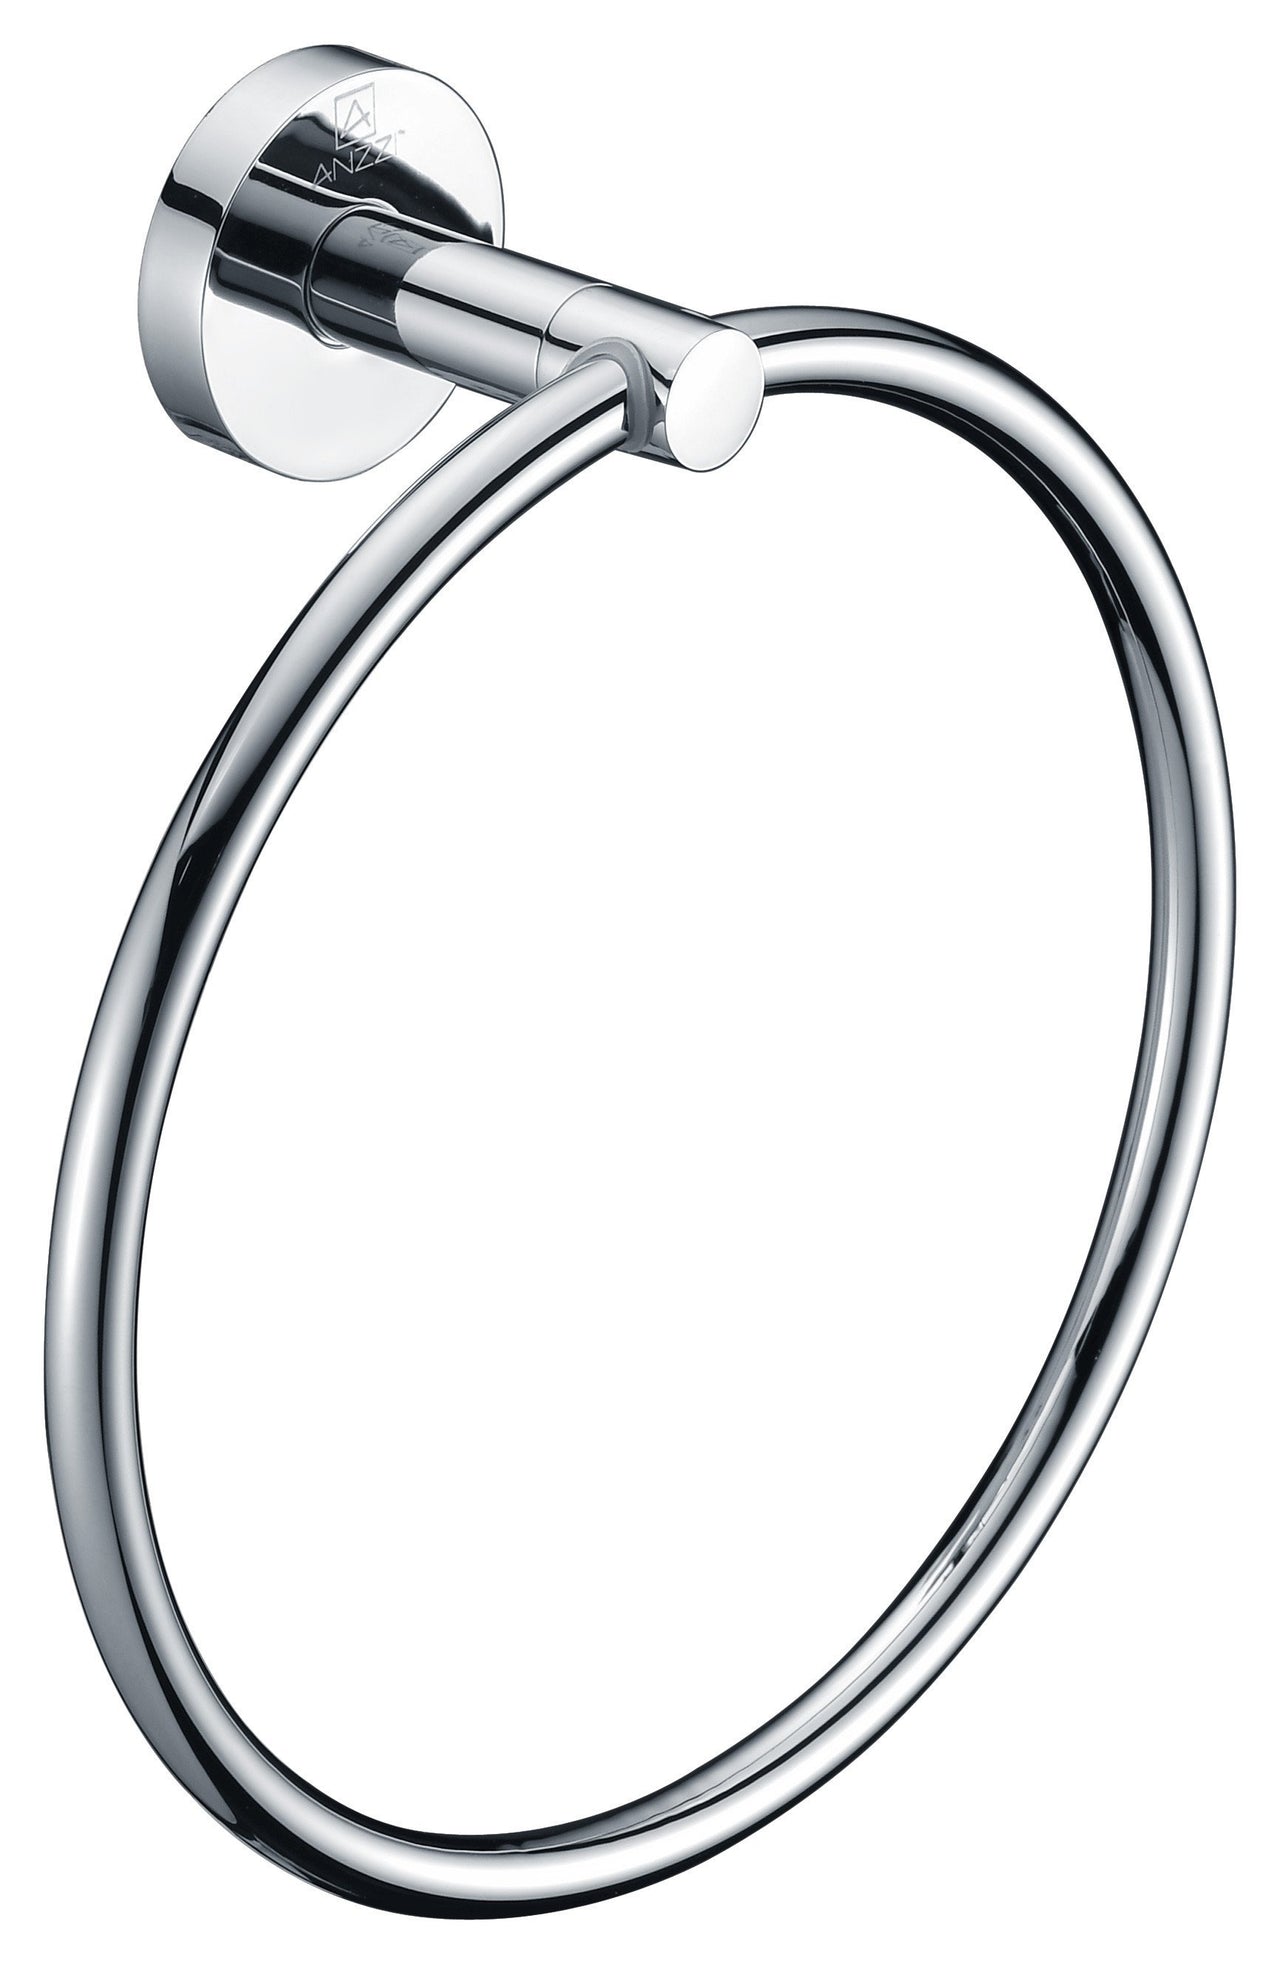 ANZZI Caster Series Towel Ring in Polished Chrome Towel Ring ANZZI 